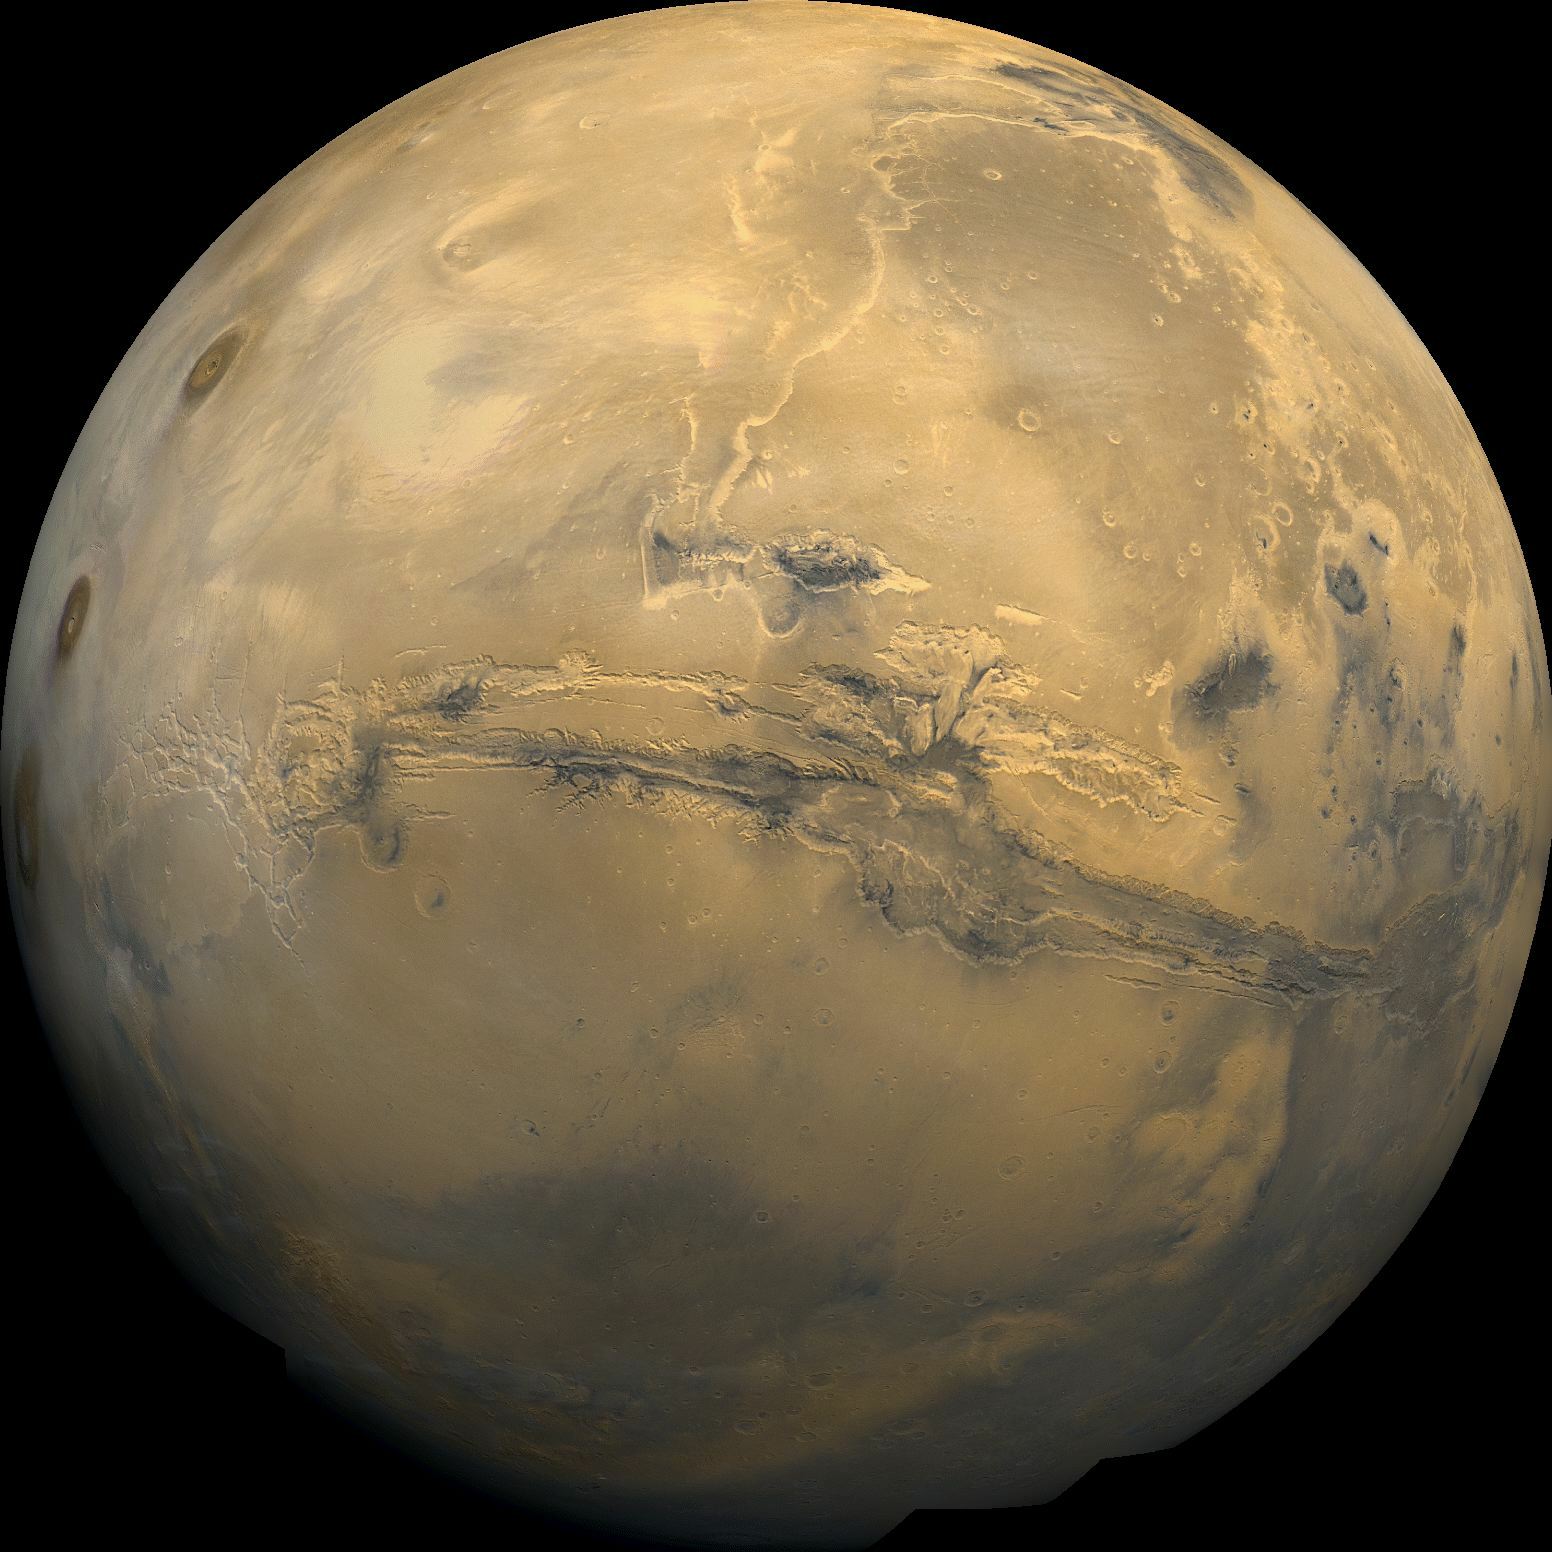 A breathtaking view of Mars from space, showcasing the majestic landscapes reminiscent of the Mars Grand Canyon.